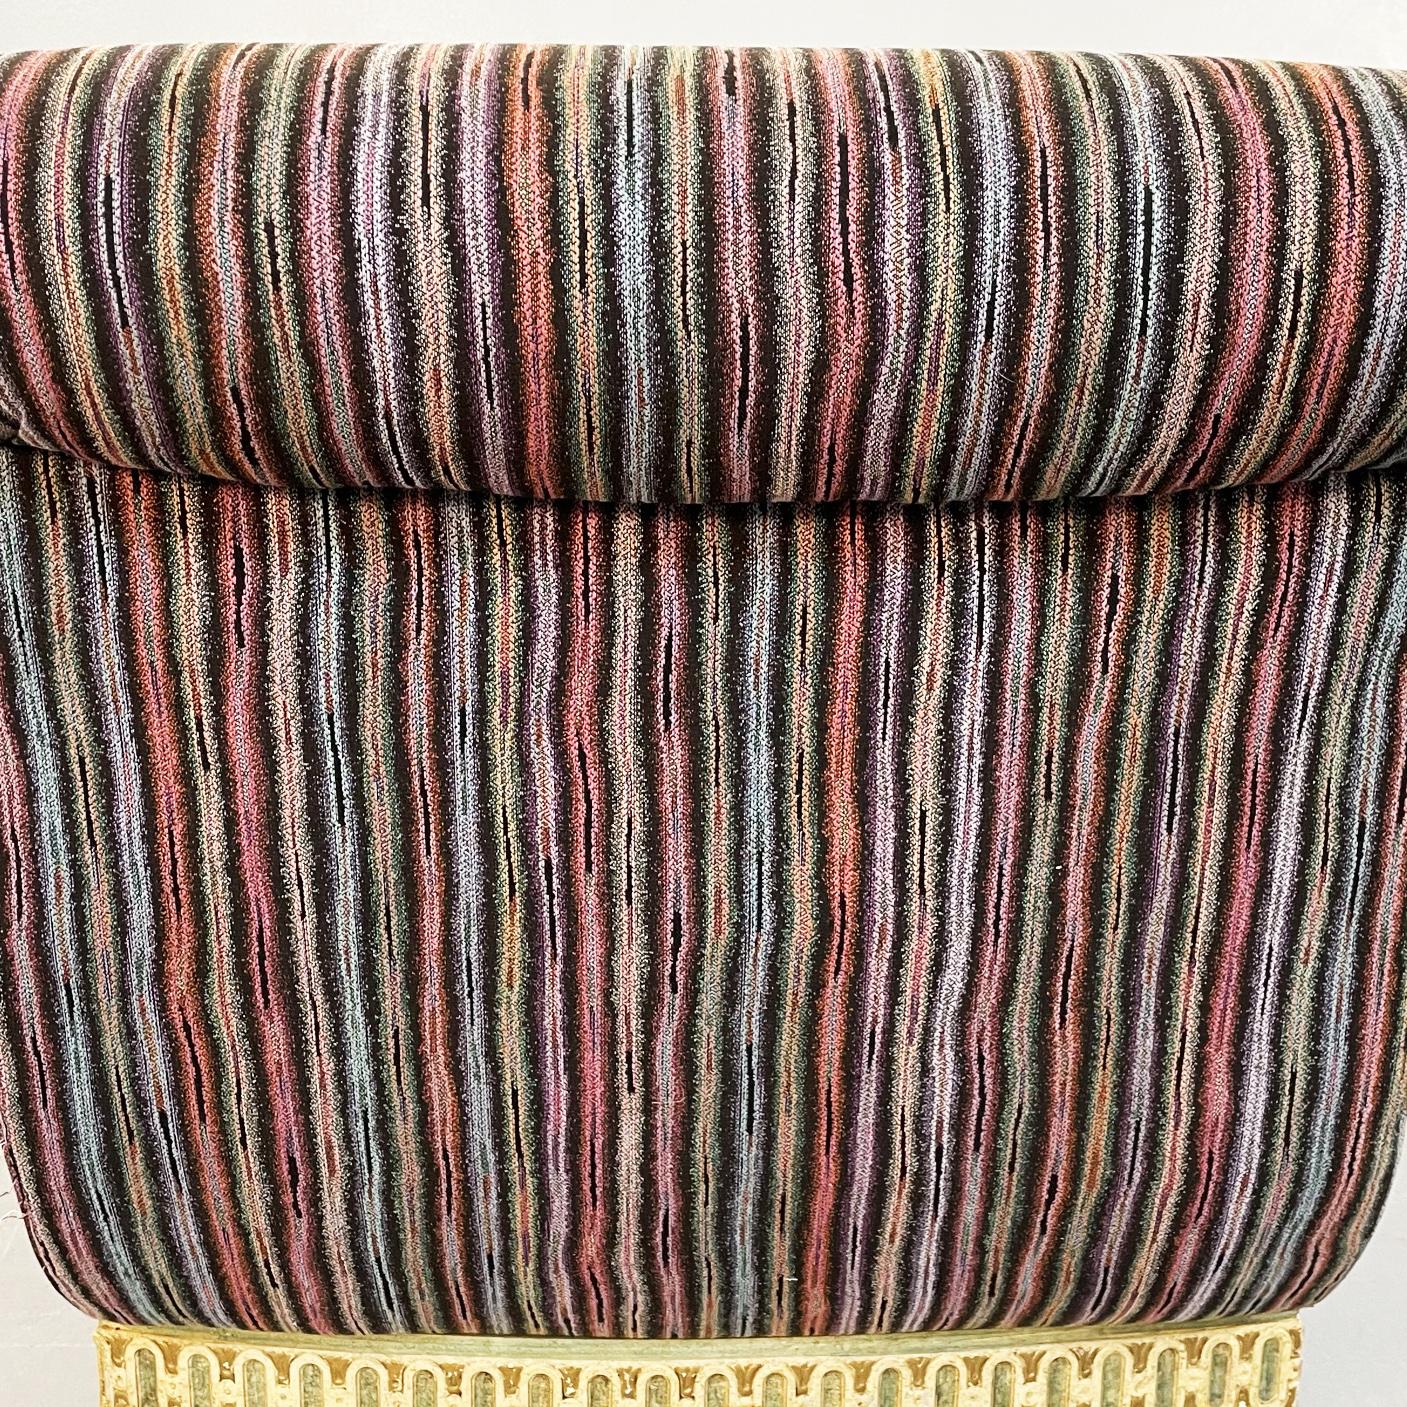 Italian Midcentury Venetian Style Chaise Longue with Missoni Striped Fabric, 1950 For Sale 8